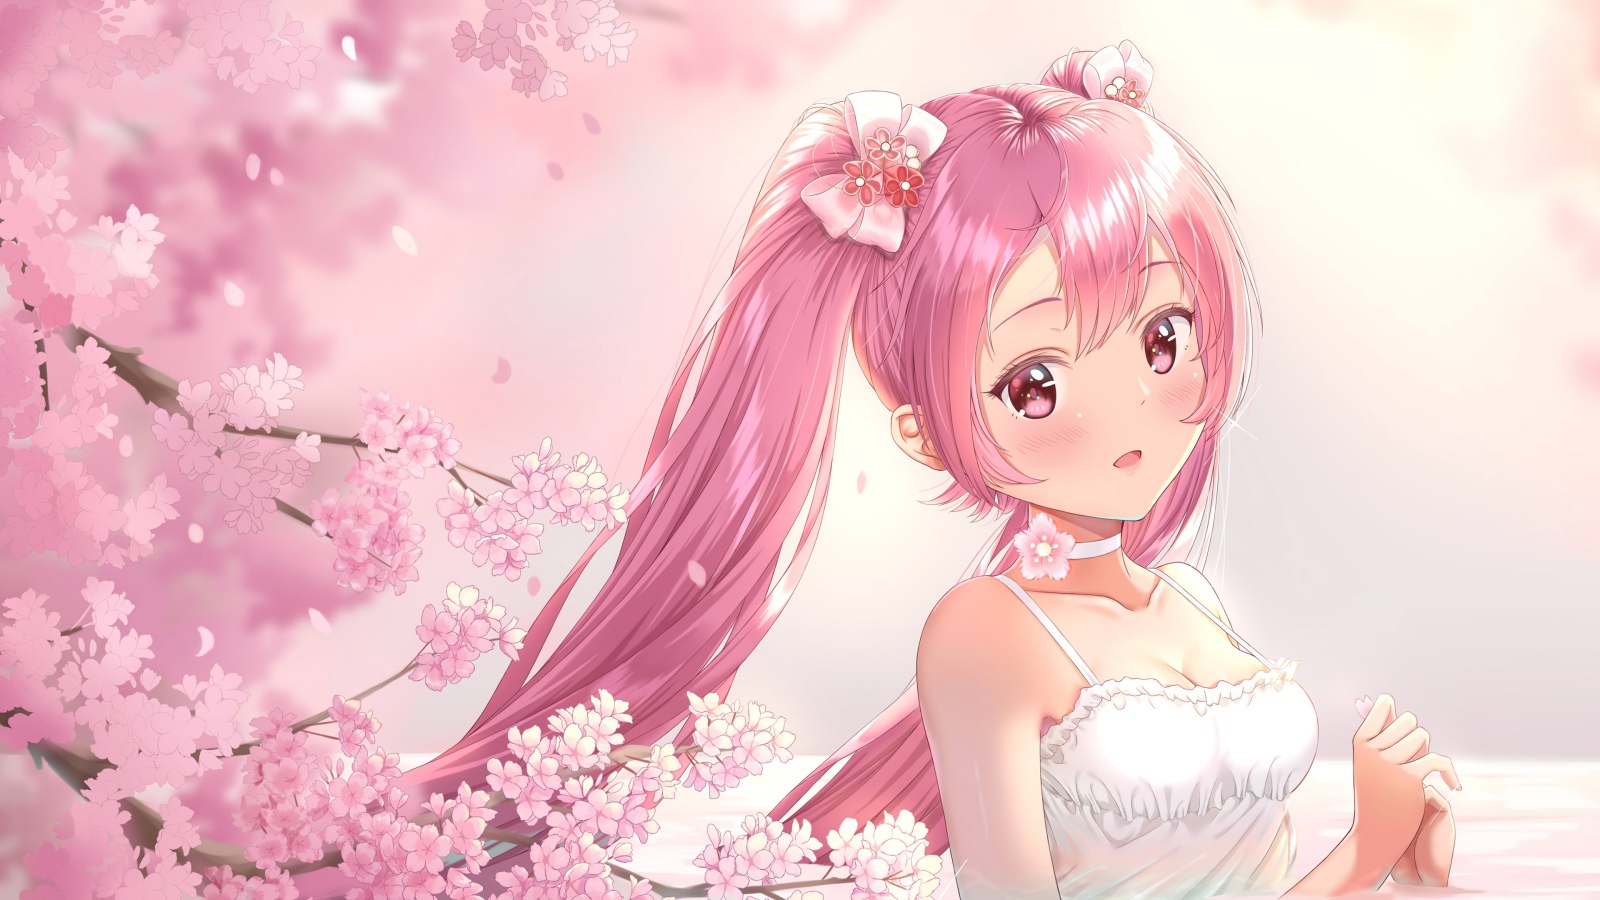 Anime girl with pink hair in a white dress